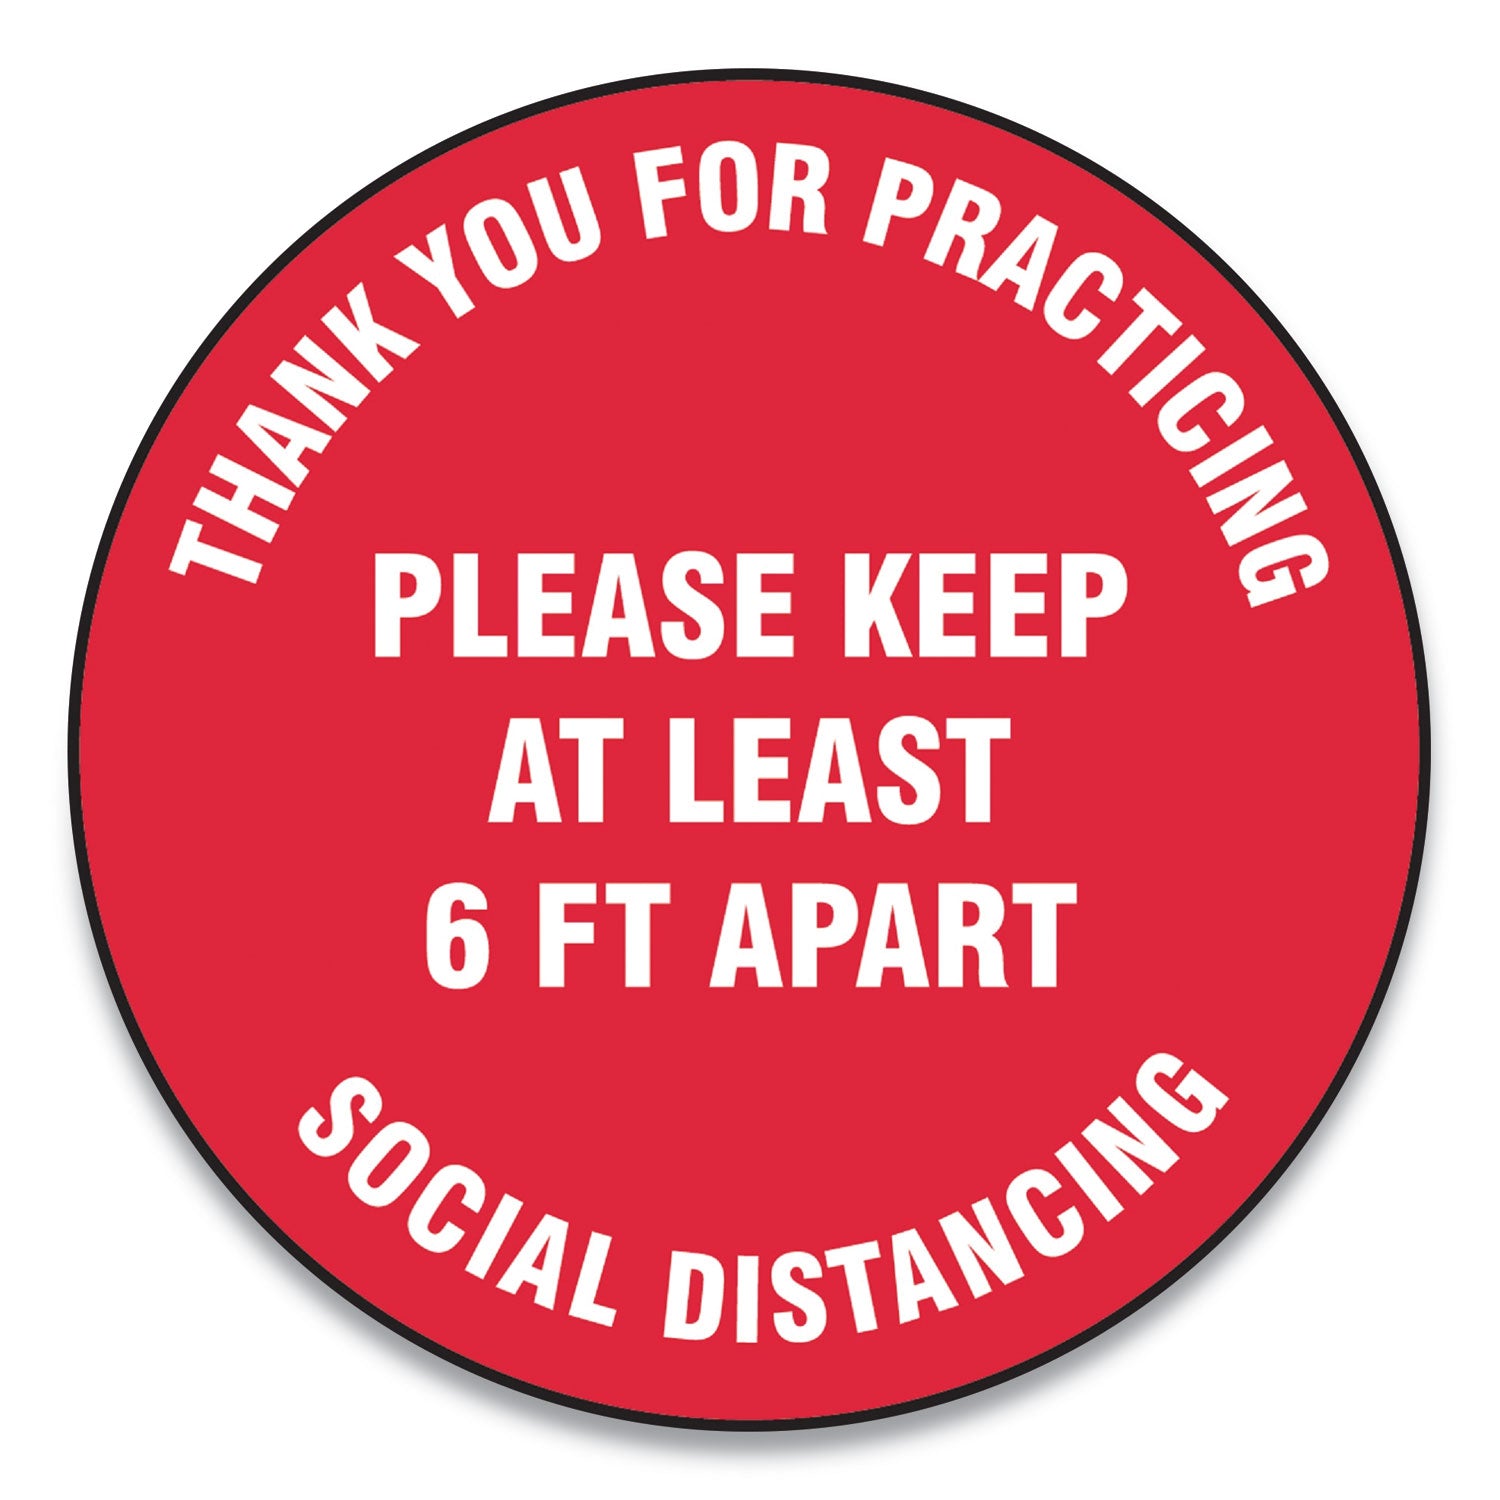 slip-gard-floor-signs-12-circle-thank-you-for-practicing-social-distancing-please-keep-at-least-6-ft-apart-red-25-pack_gn1mfs422esp - 1